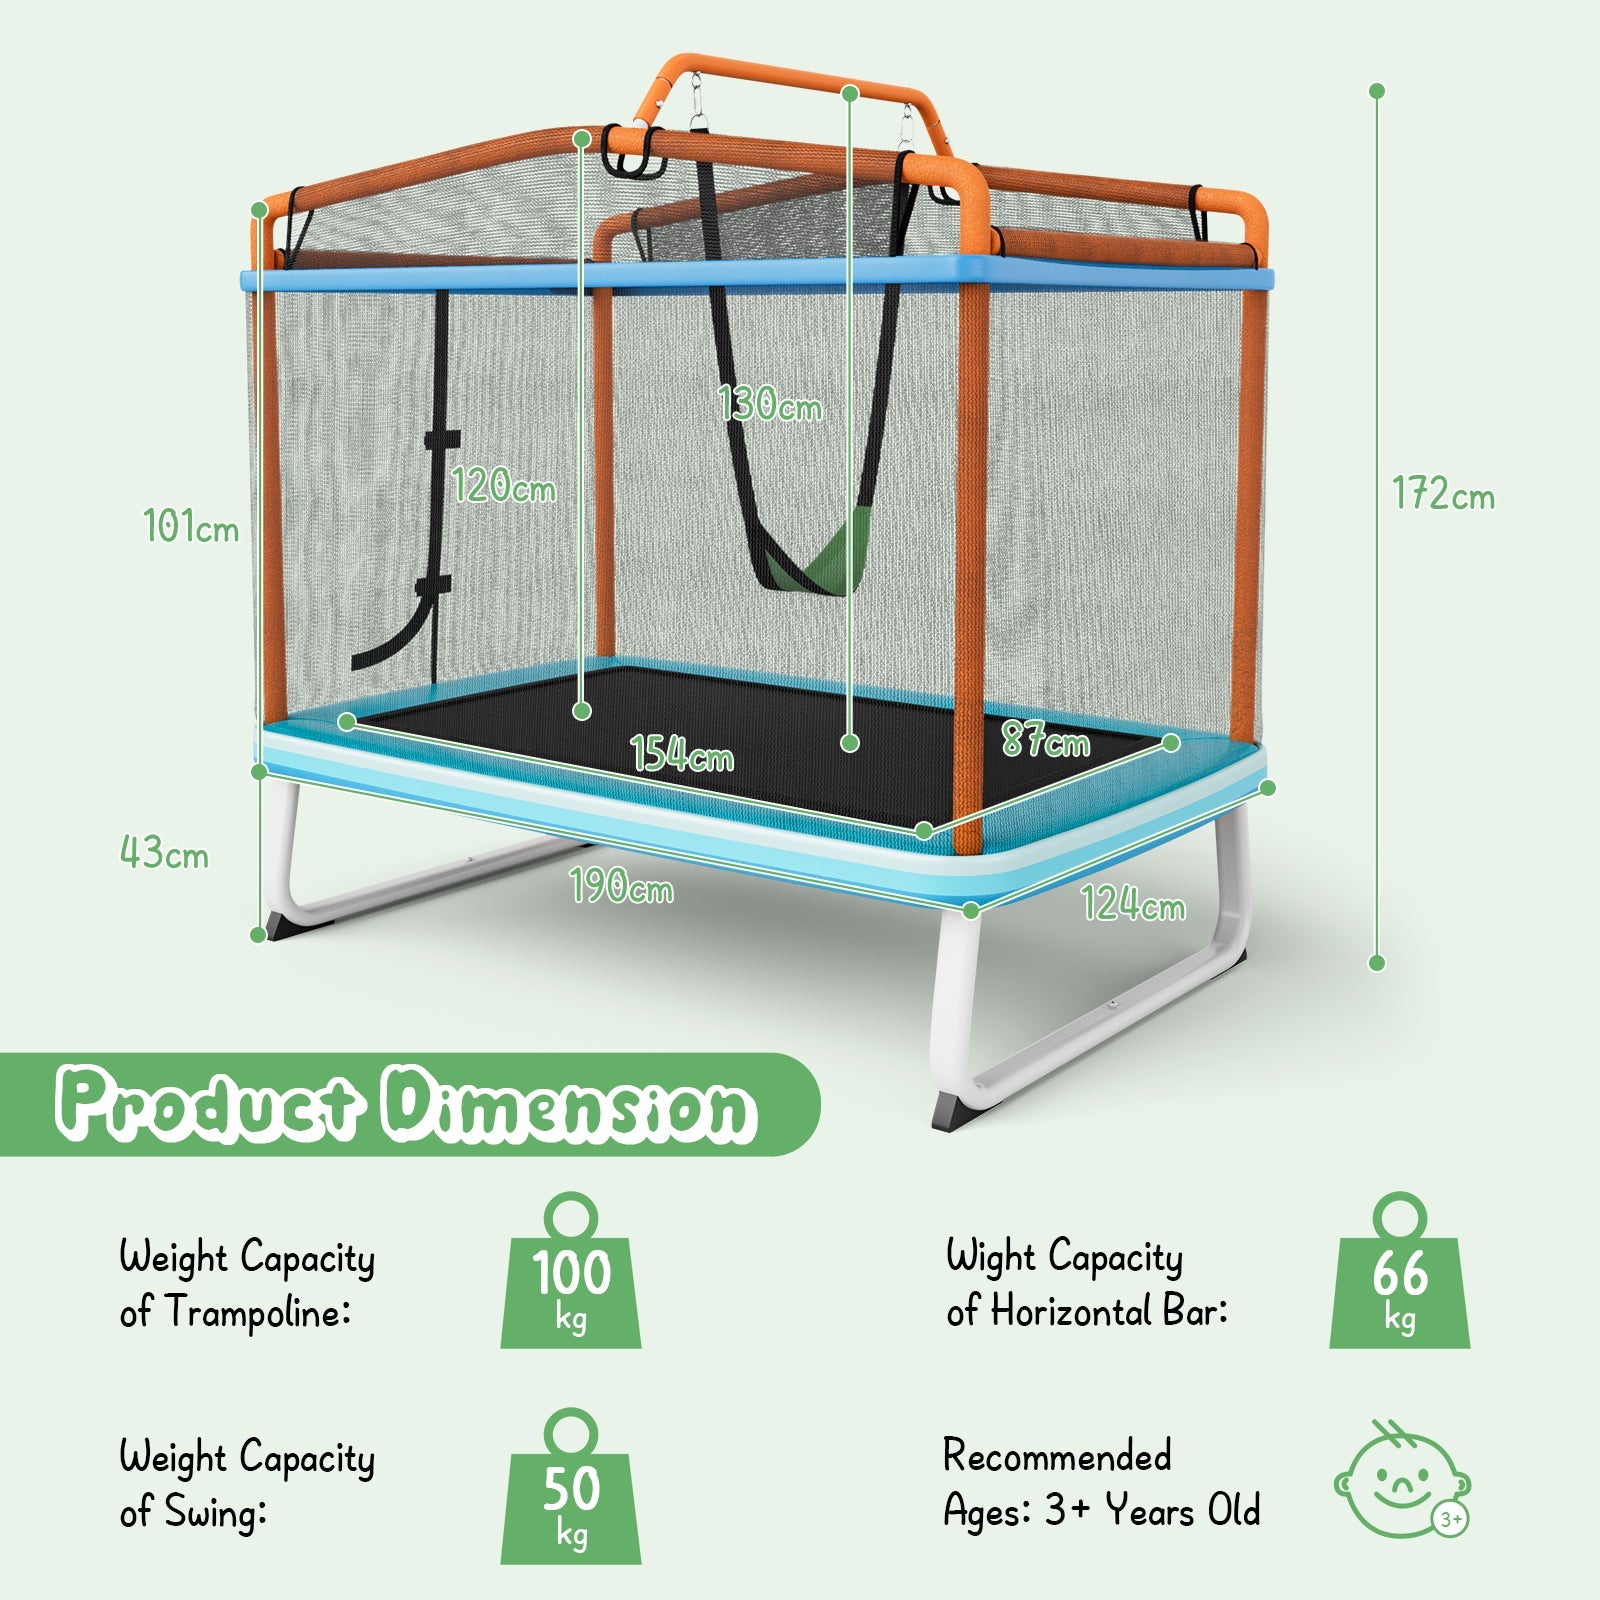 Boundless Play: 3-in-1 Rectangle Trampoline with Swing & Horizontal Bar Orange